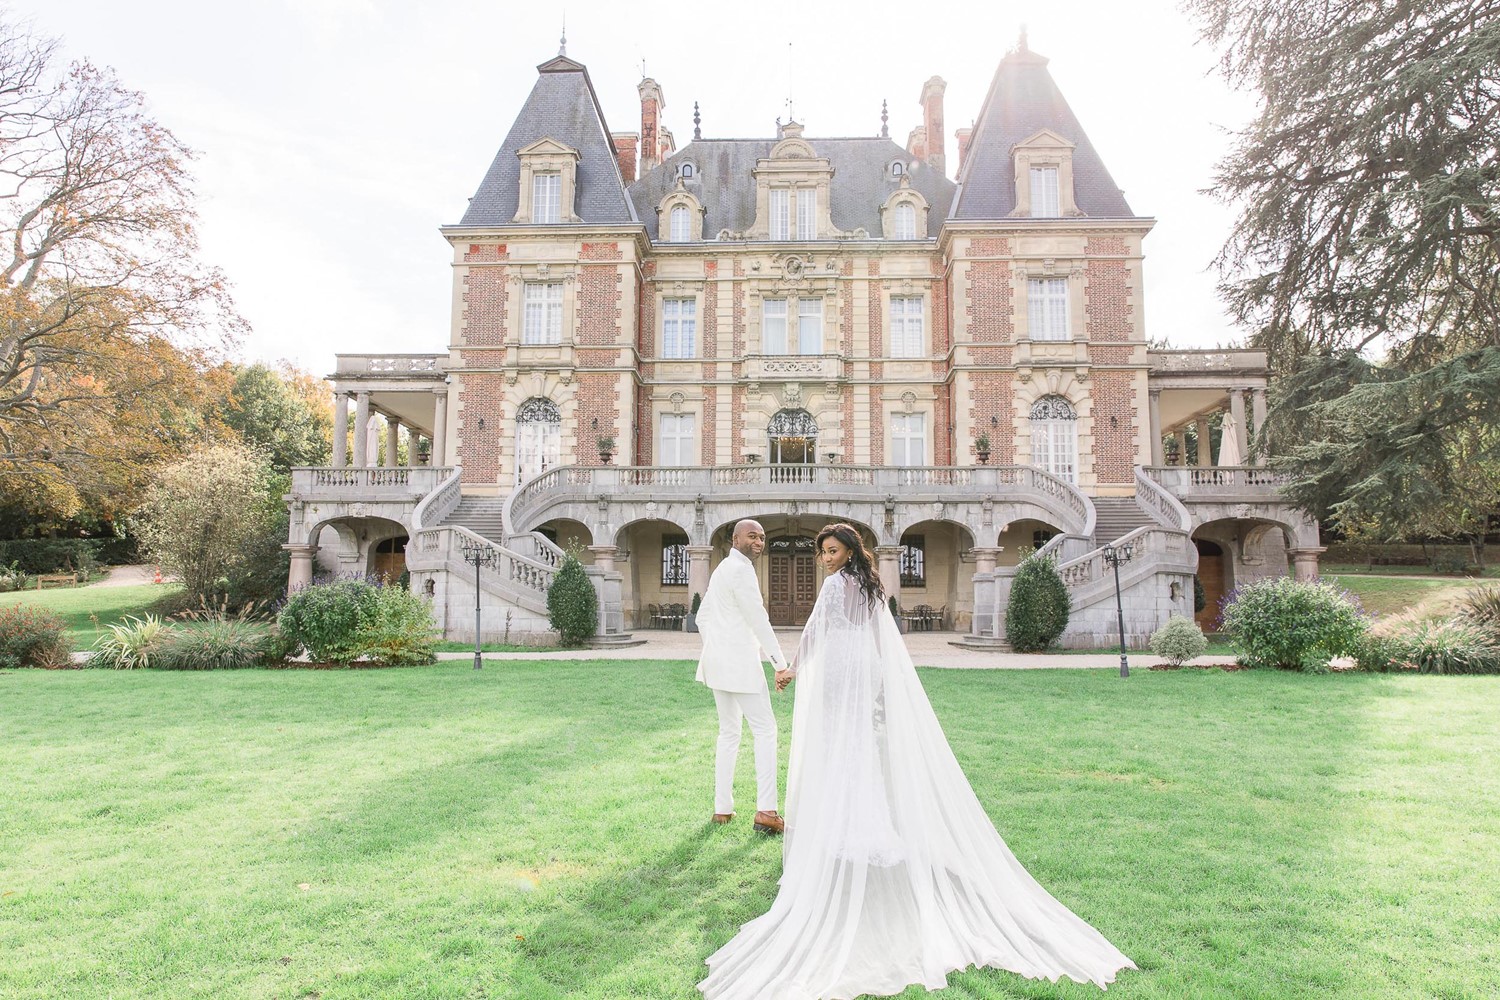 Main Picture: Romantic Wedding Inspiration at French Chateau